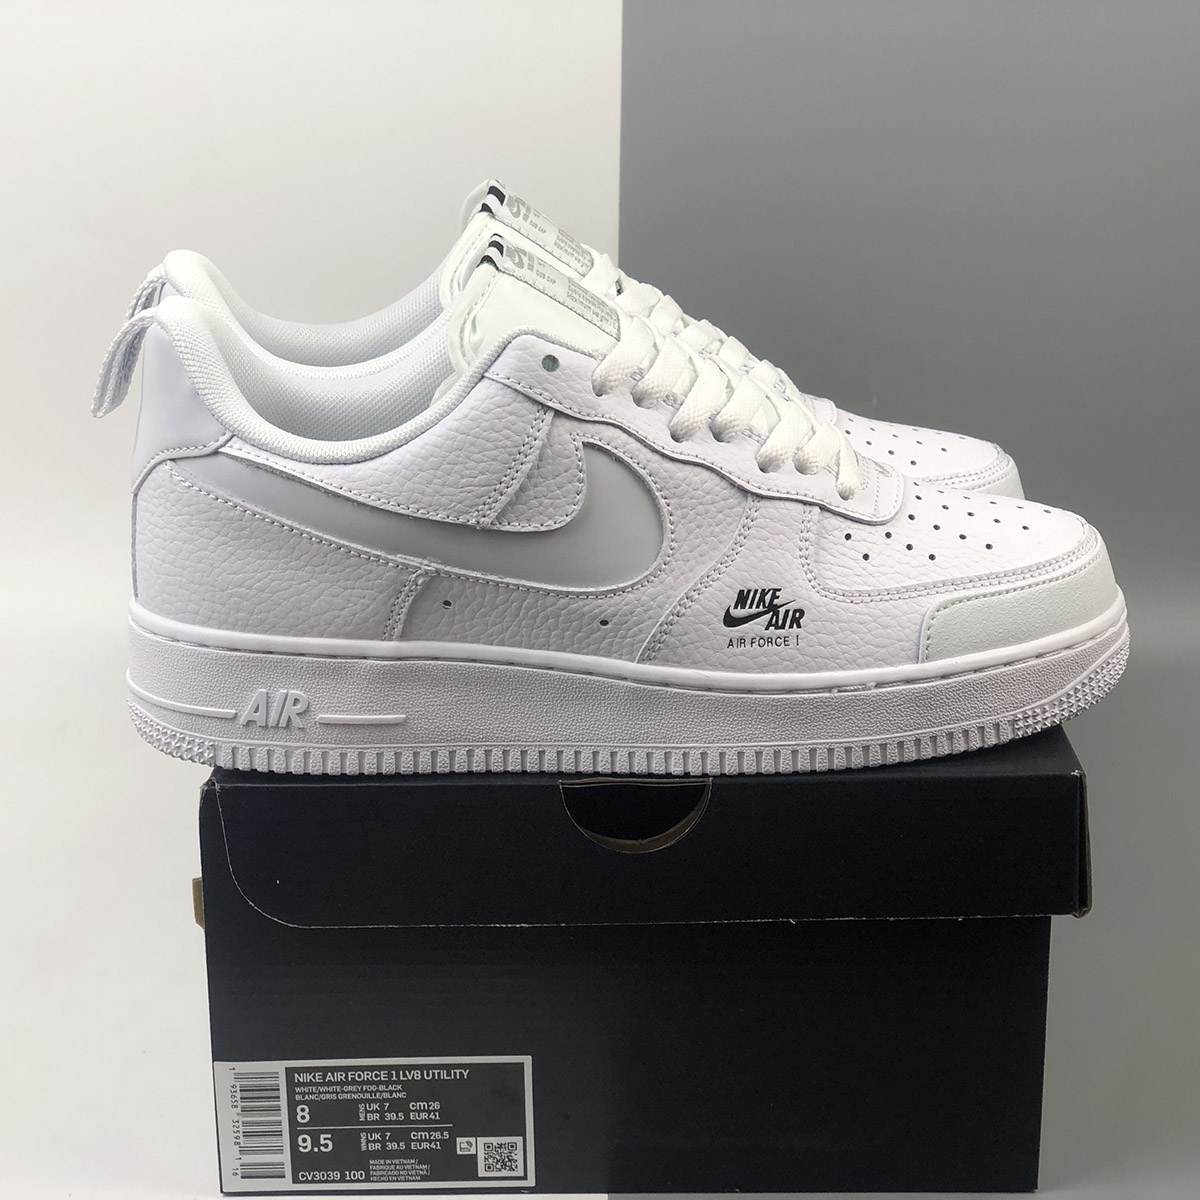 Nike Air Force 1 Low In-Cut Reflective Swooshes For Sale – The Sole Line